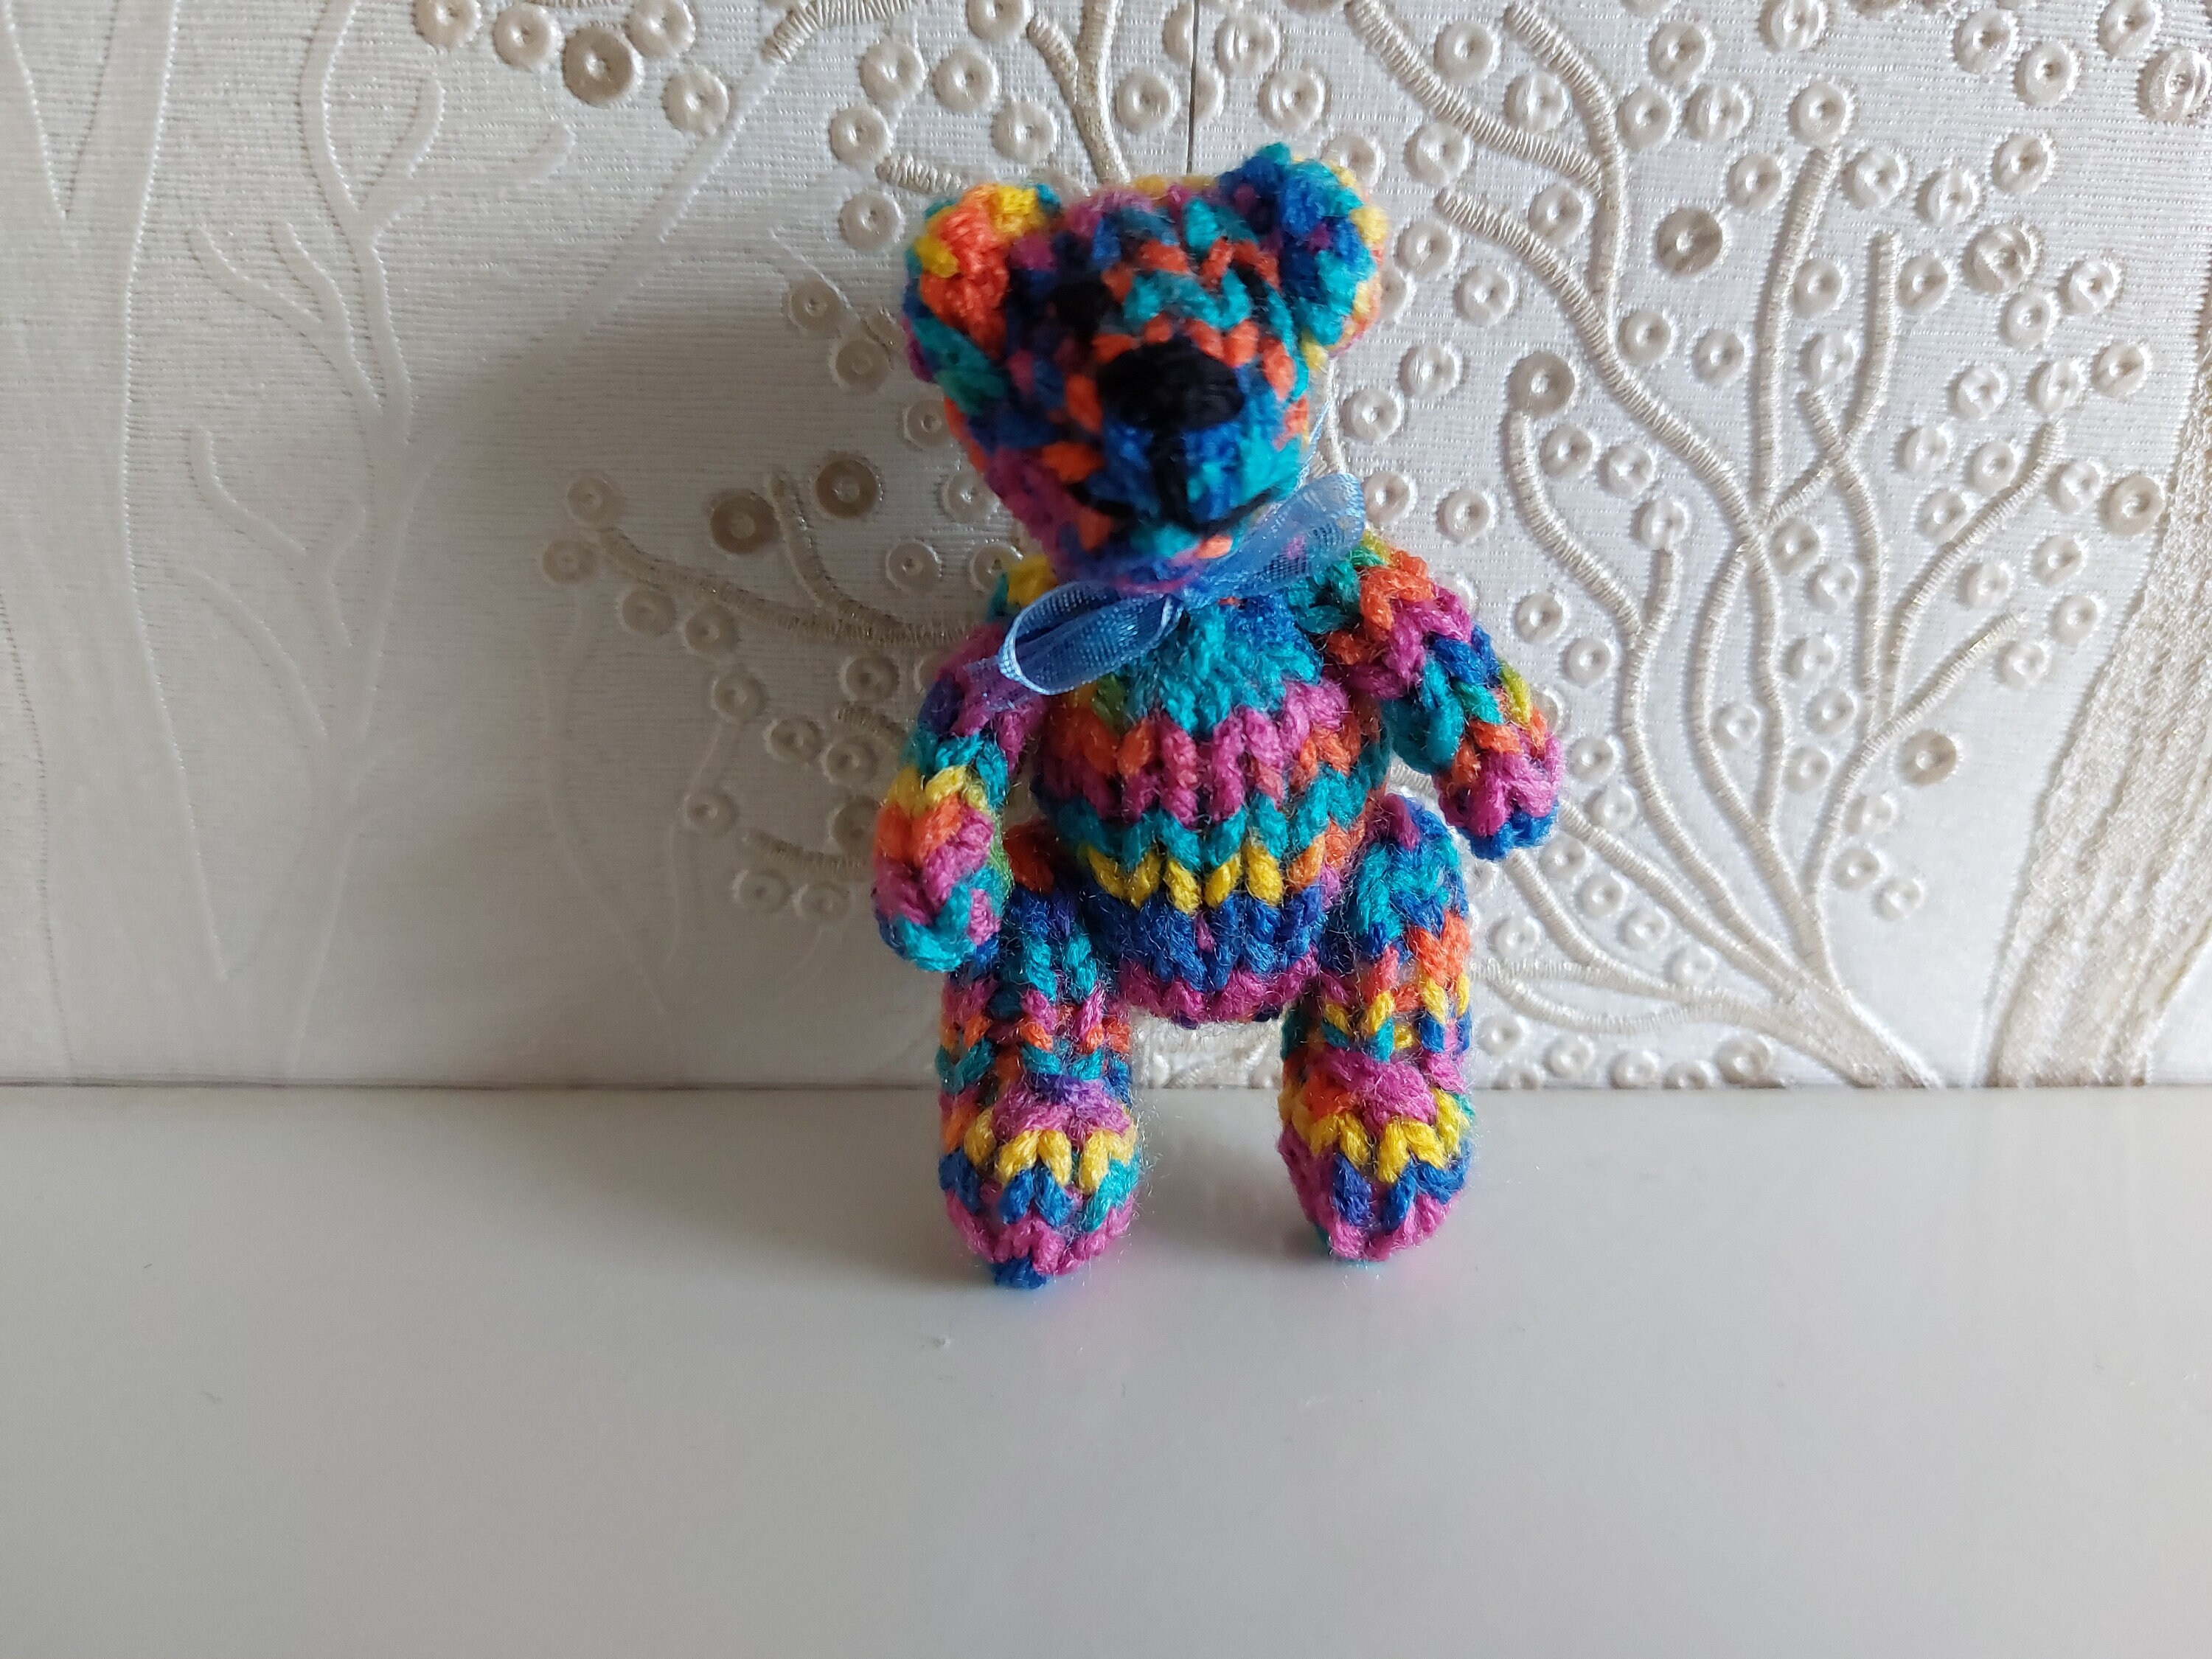 7 cm Pale Lemon Hand Knitted Tiny Jointed Teddy Bear Birthday Gift 